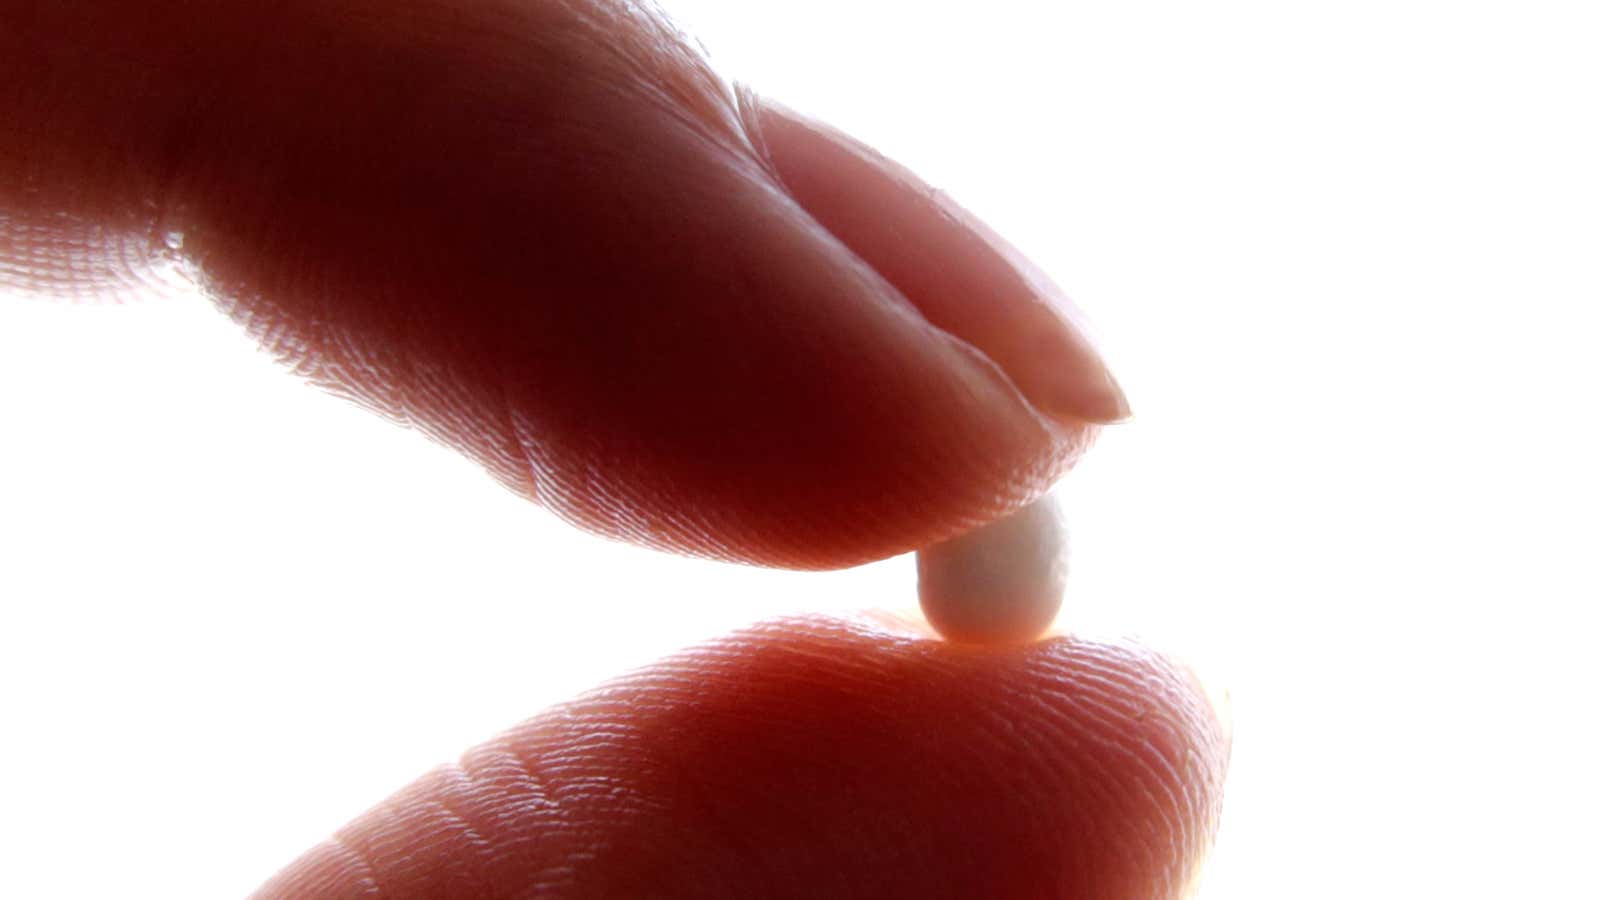 This little pill may be sturdier than we think.